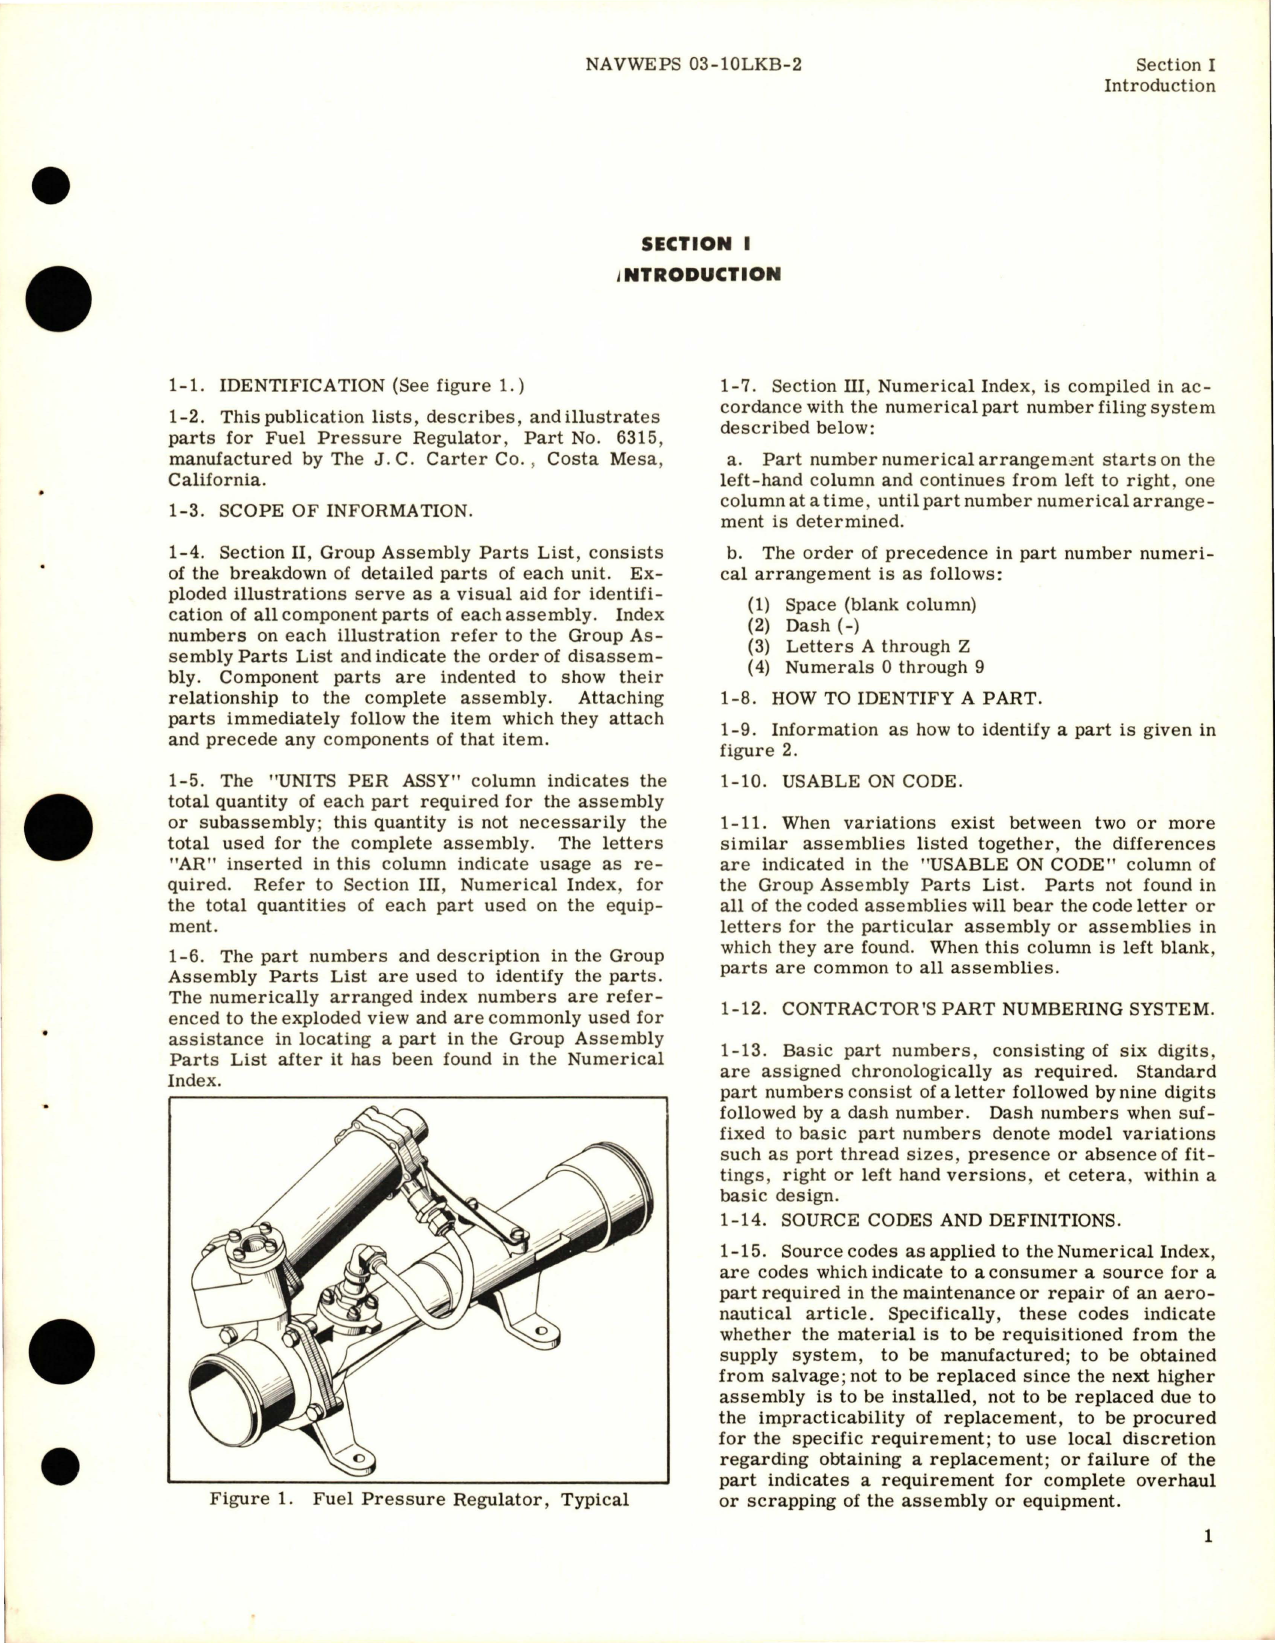 Sample page 5 from AirCorps Library document: Illustrated Parts Breakdown for Fuel Pressure Regulator - Part 6315